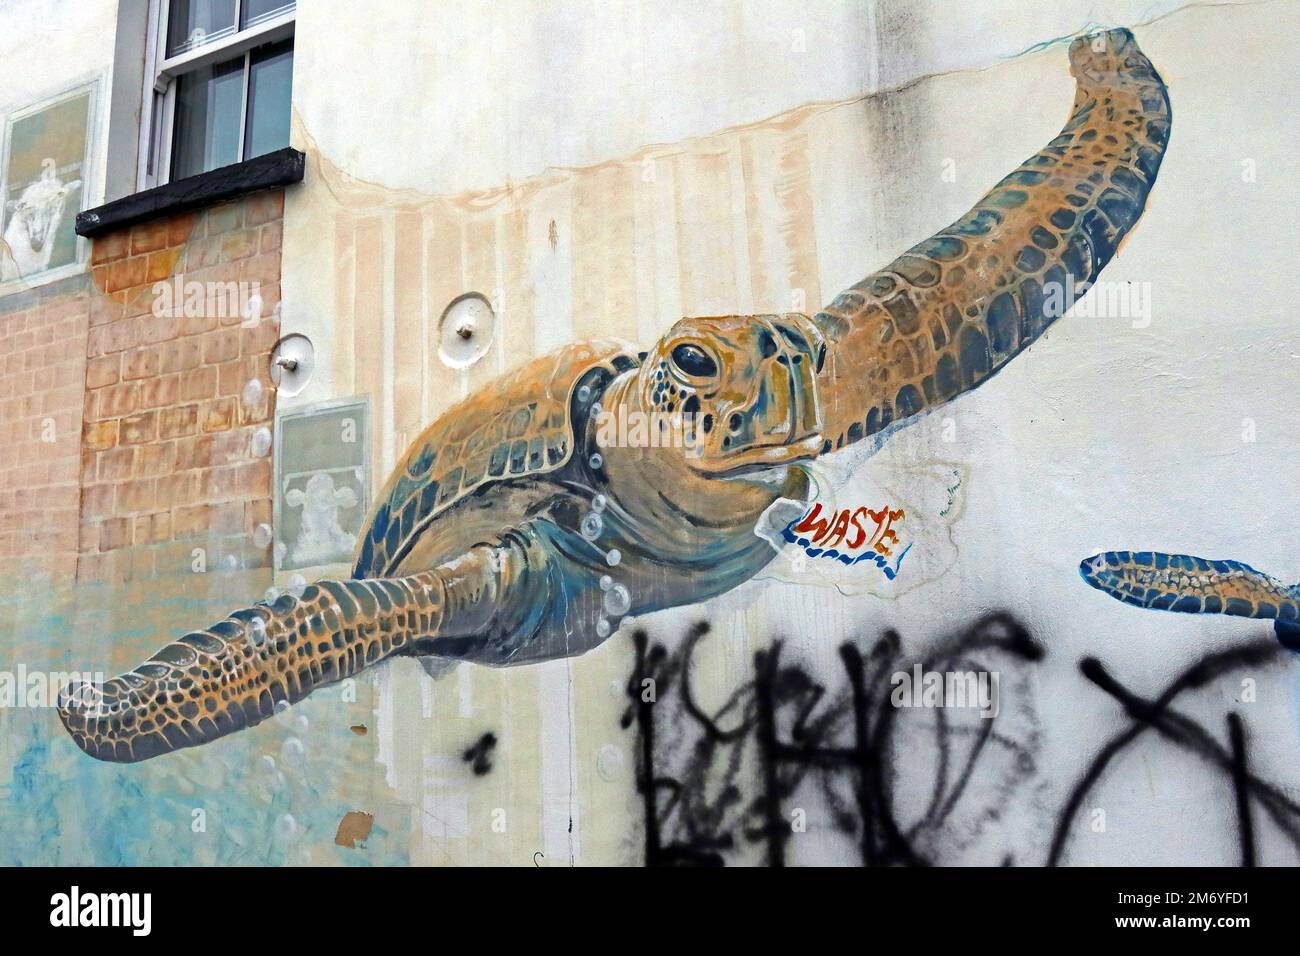 Swimming Turtle and Word Waste, Art in High St Cheltenham, vom Paint Festival, Gloucestershire, England, GL50 3JF Stockfoto